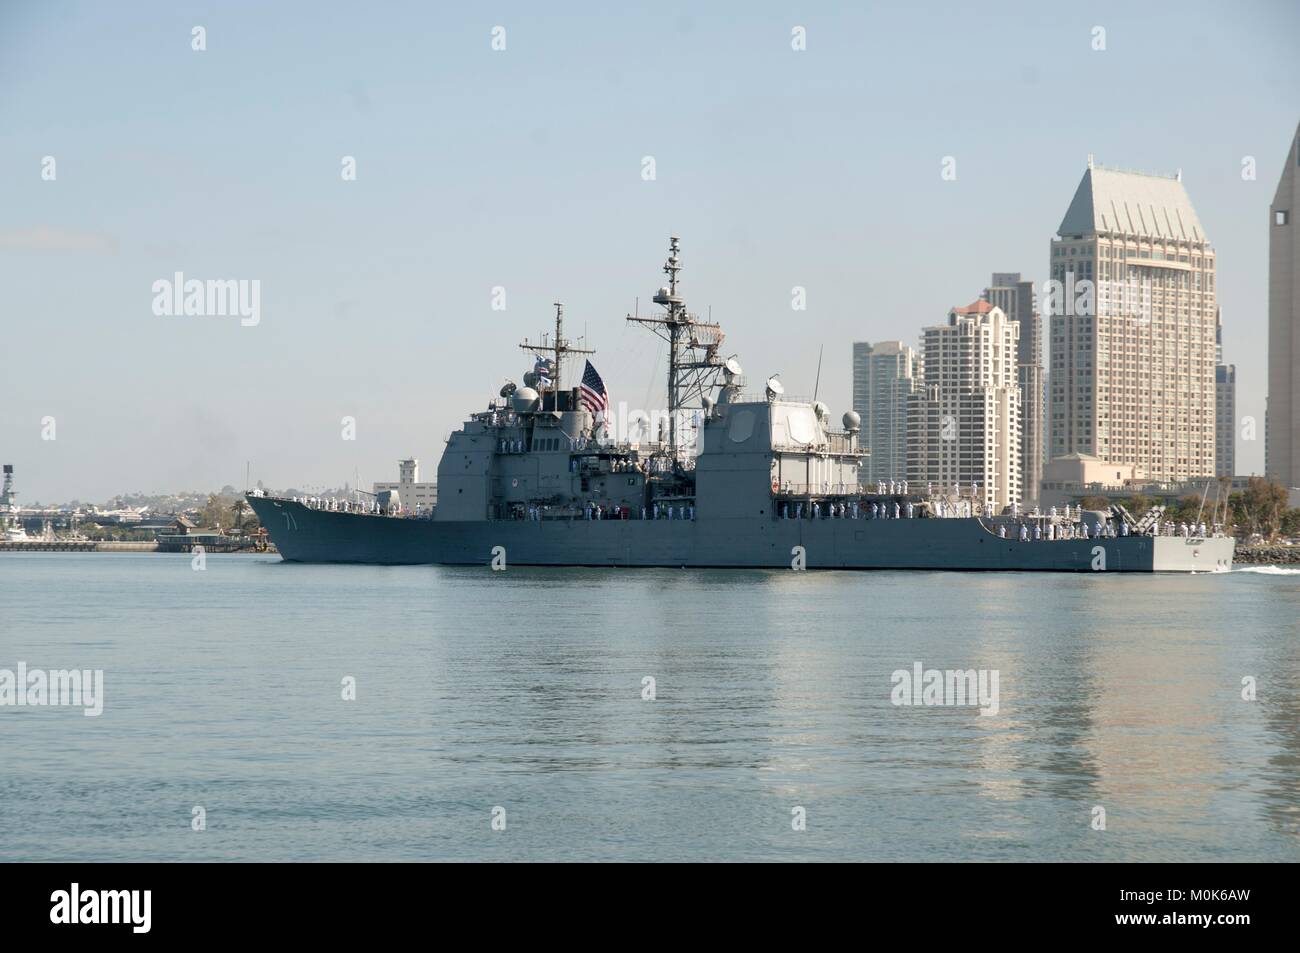 The U.S. Navy Ticonderoga-class guided-missile cruiser USS Cape St. George departs the Naval Base San Diego June 16, 2014 in San Diego, California. Stock Photo